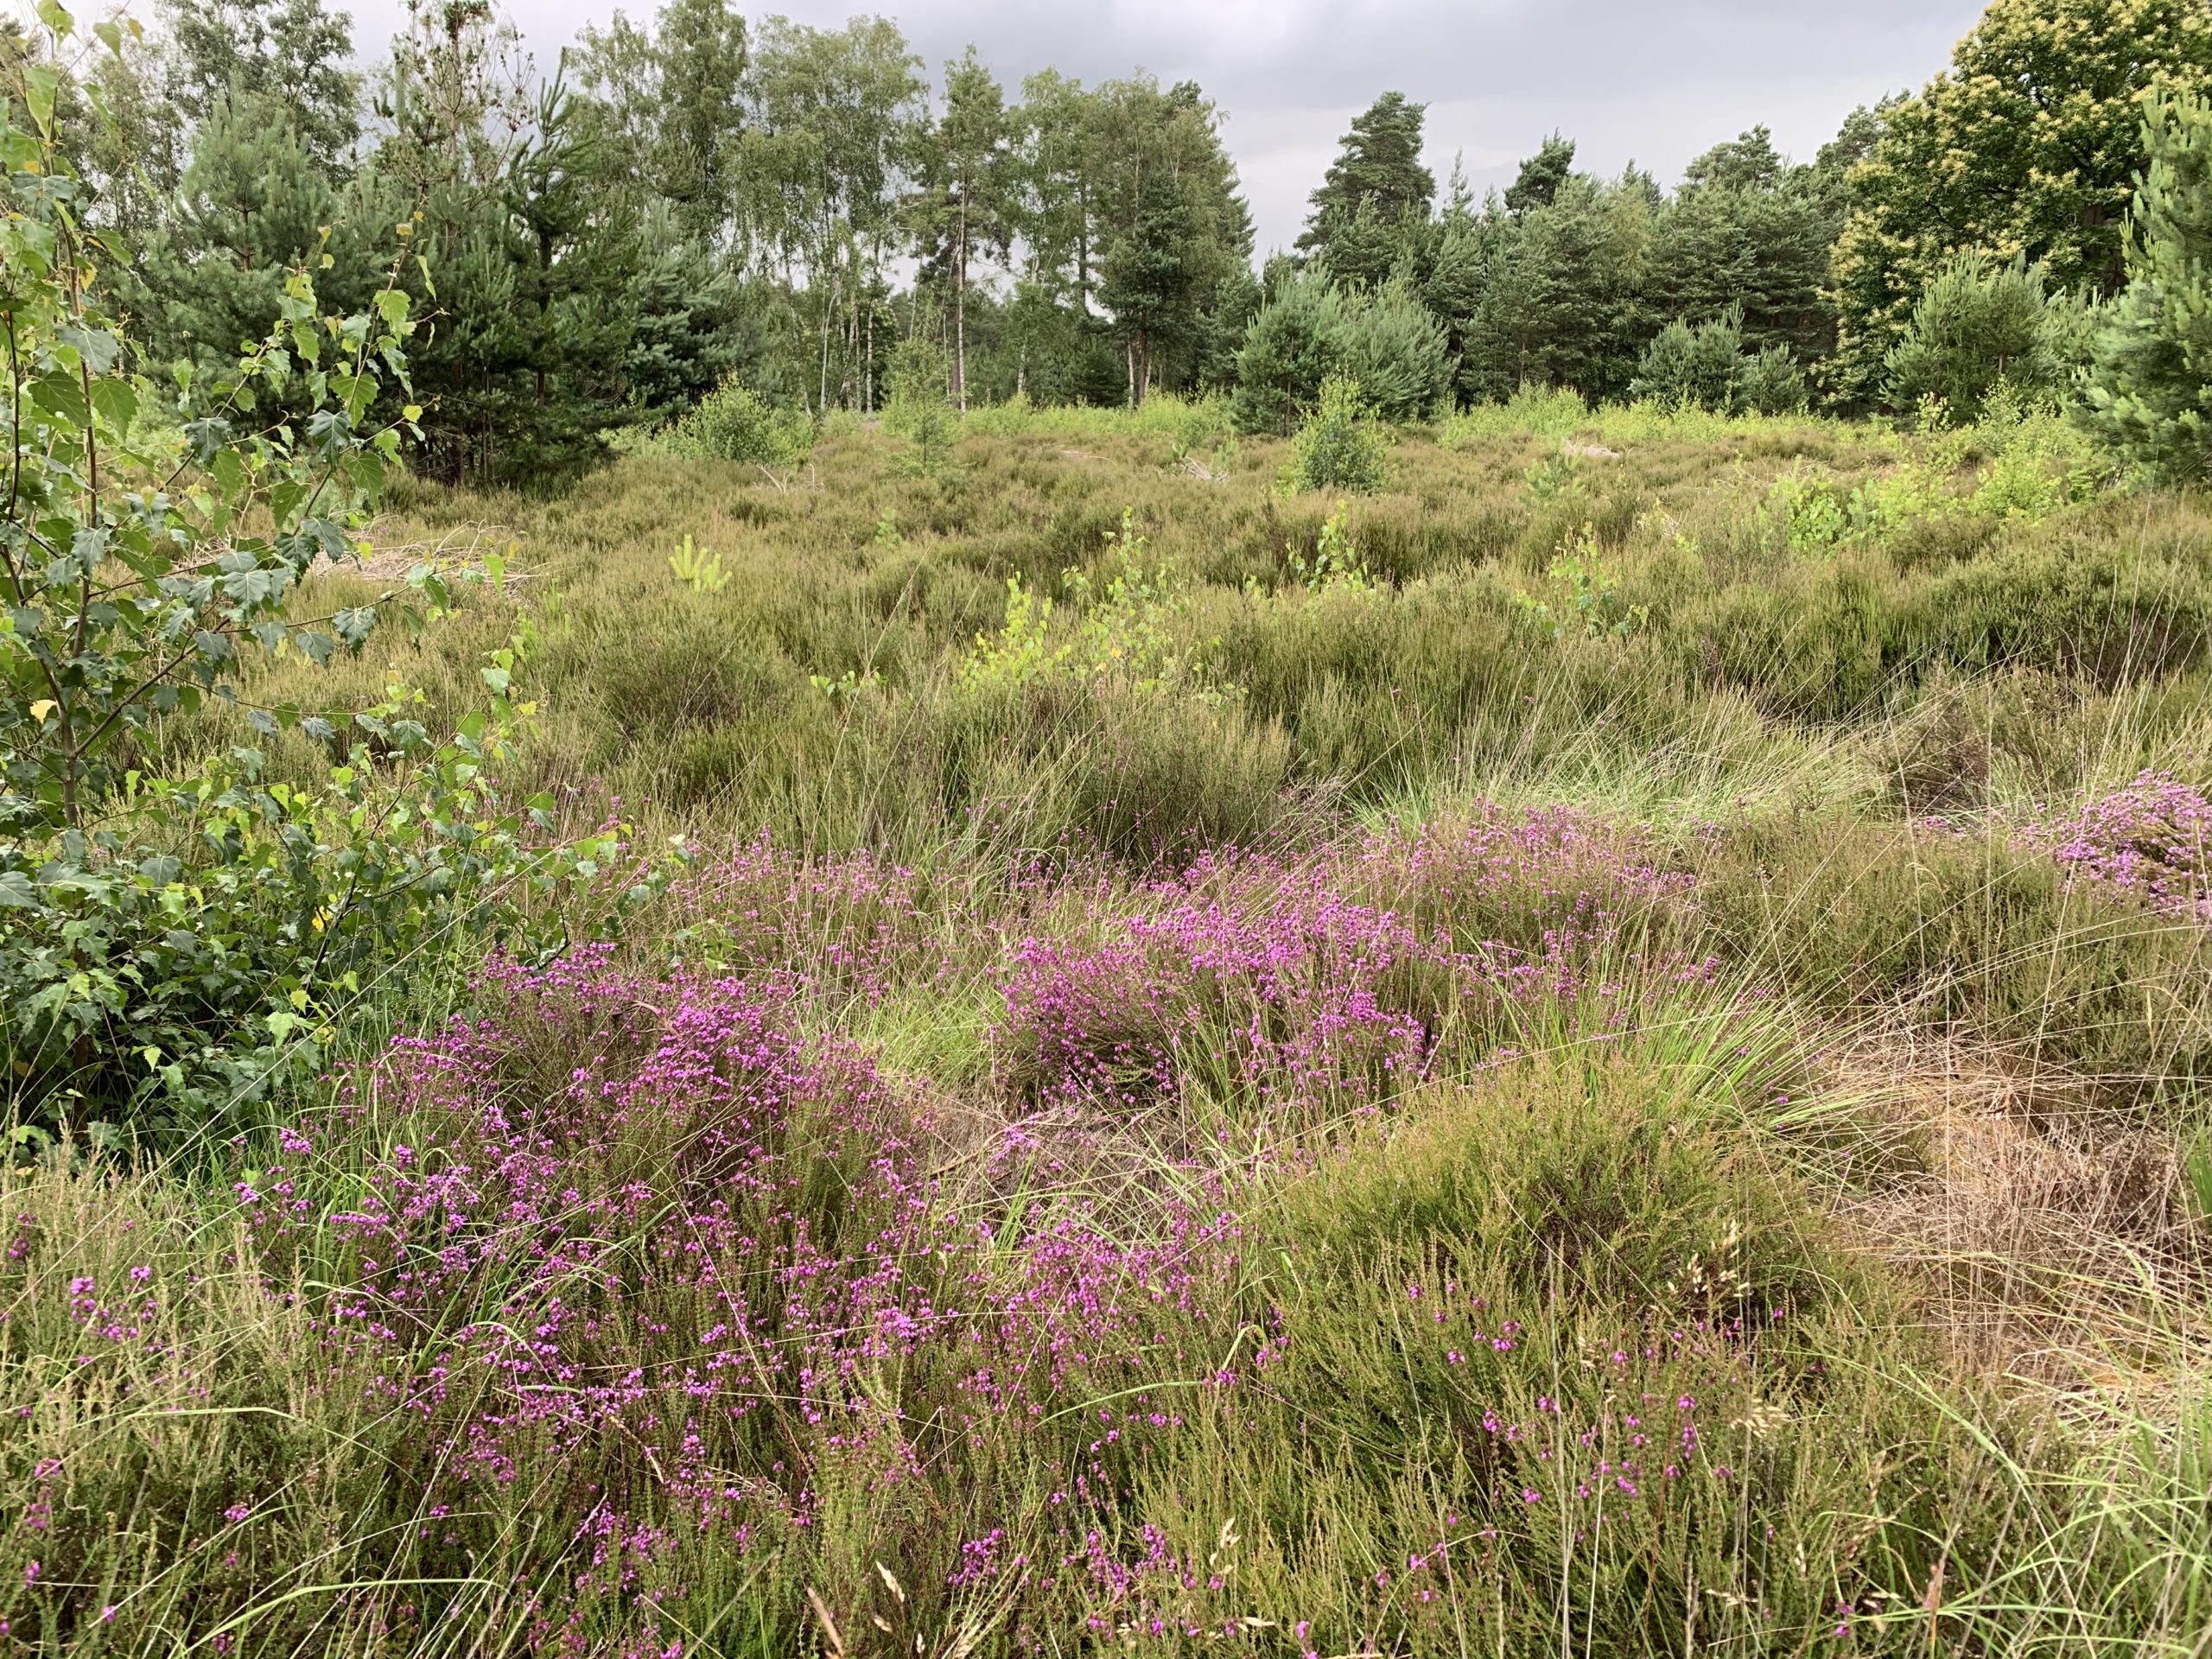 Photo of a heathland clearing, with pink heather in flower, and scattered small trees amongst the heather.